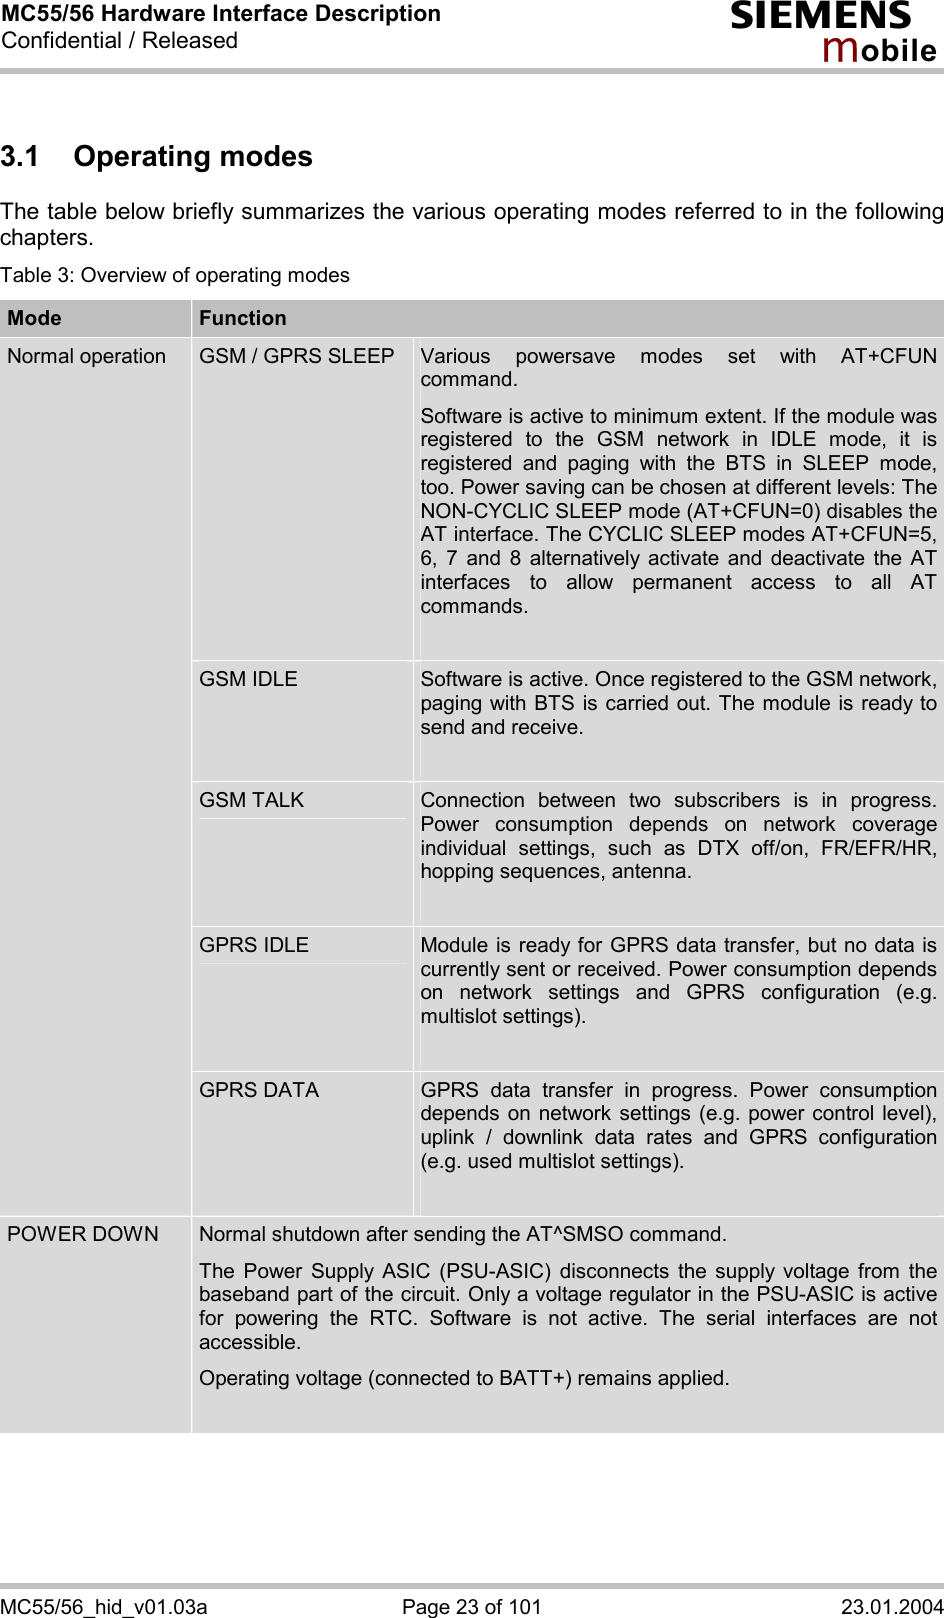 MC55/56 Hardware Interface Description Confidential / Released s mo b i l e MC55/56_hid_v01.03a  Page 23 of 101  23.01.2004 3.1 Operating modes The table below briefly summarizes the various operating modes referred to in the following chapters.  Table 3: Overview of operating modes Mode  Function GSM / GPRS SLEEP  Various powersave modes set with AT+CFUN command.  Software is active to minimum extent. If the module was registered to the GSM network in IDLE mode, it is registered and paging with the BTS in SLEEP mode, too. Power saving can be chosen at different levels: The NON-CYCLIC SLEEP mode (AT+CFUN=0) disables the AT interface. The CYCLIC SLEEP modes AT+CFUN=5, 6, 7 and 8 alternatively activate and deactivate the AT interfaces to allow permanent access to all AT commands.  GSM IDLE  Software is active. Once registered to the GSM network, paging with BTS is carried out. The module is ready to send and receive.  GSM TALK  Connection between two subscribers is in progress. Power consumption depends on network coverage individual settings, such as DTX off/on, FR/EFR/HR, hopping sequences, antenna.  GPRS IDLE  Module is ready for GPRS data transfer, but no data is currently sent or received. Power consumption depends on network settings and GPRS configuration (e.g. multislot settings).  Normal operation GPRS DATA  GPRS data transfer in progress. Power consumption depends on network settings (e.g. power control level), uplink / downlink data rates and GPRS configuration (e.g. used multislot settings).  POWER DOWN  Normal shutdown after sending the AT^SMSO command.  The Power Supply ASIC (PSU-ASIC) disconnects the supply voltage from the baseband part of the circuit. Only a voltage regulator in the PSU-ASIC is active for powering the RTC. Software is not active. The serial interfaces are not accessible.  Operating voltage (connected to BATT+) remains applied.  